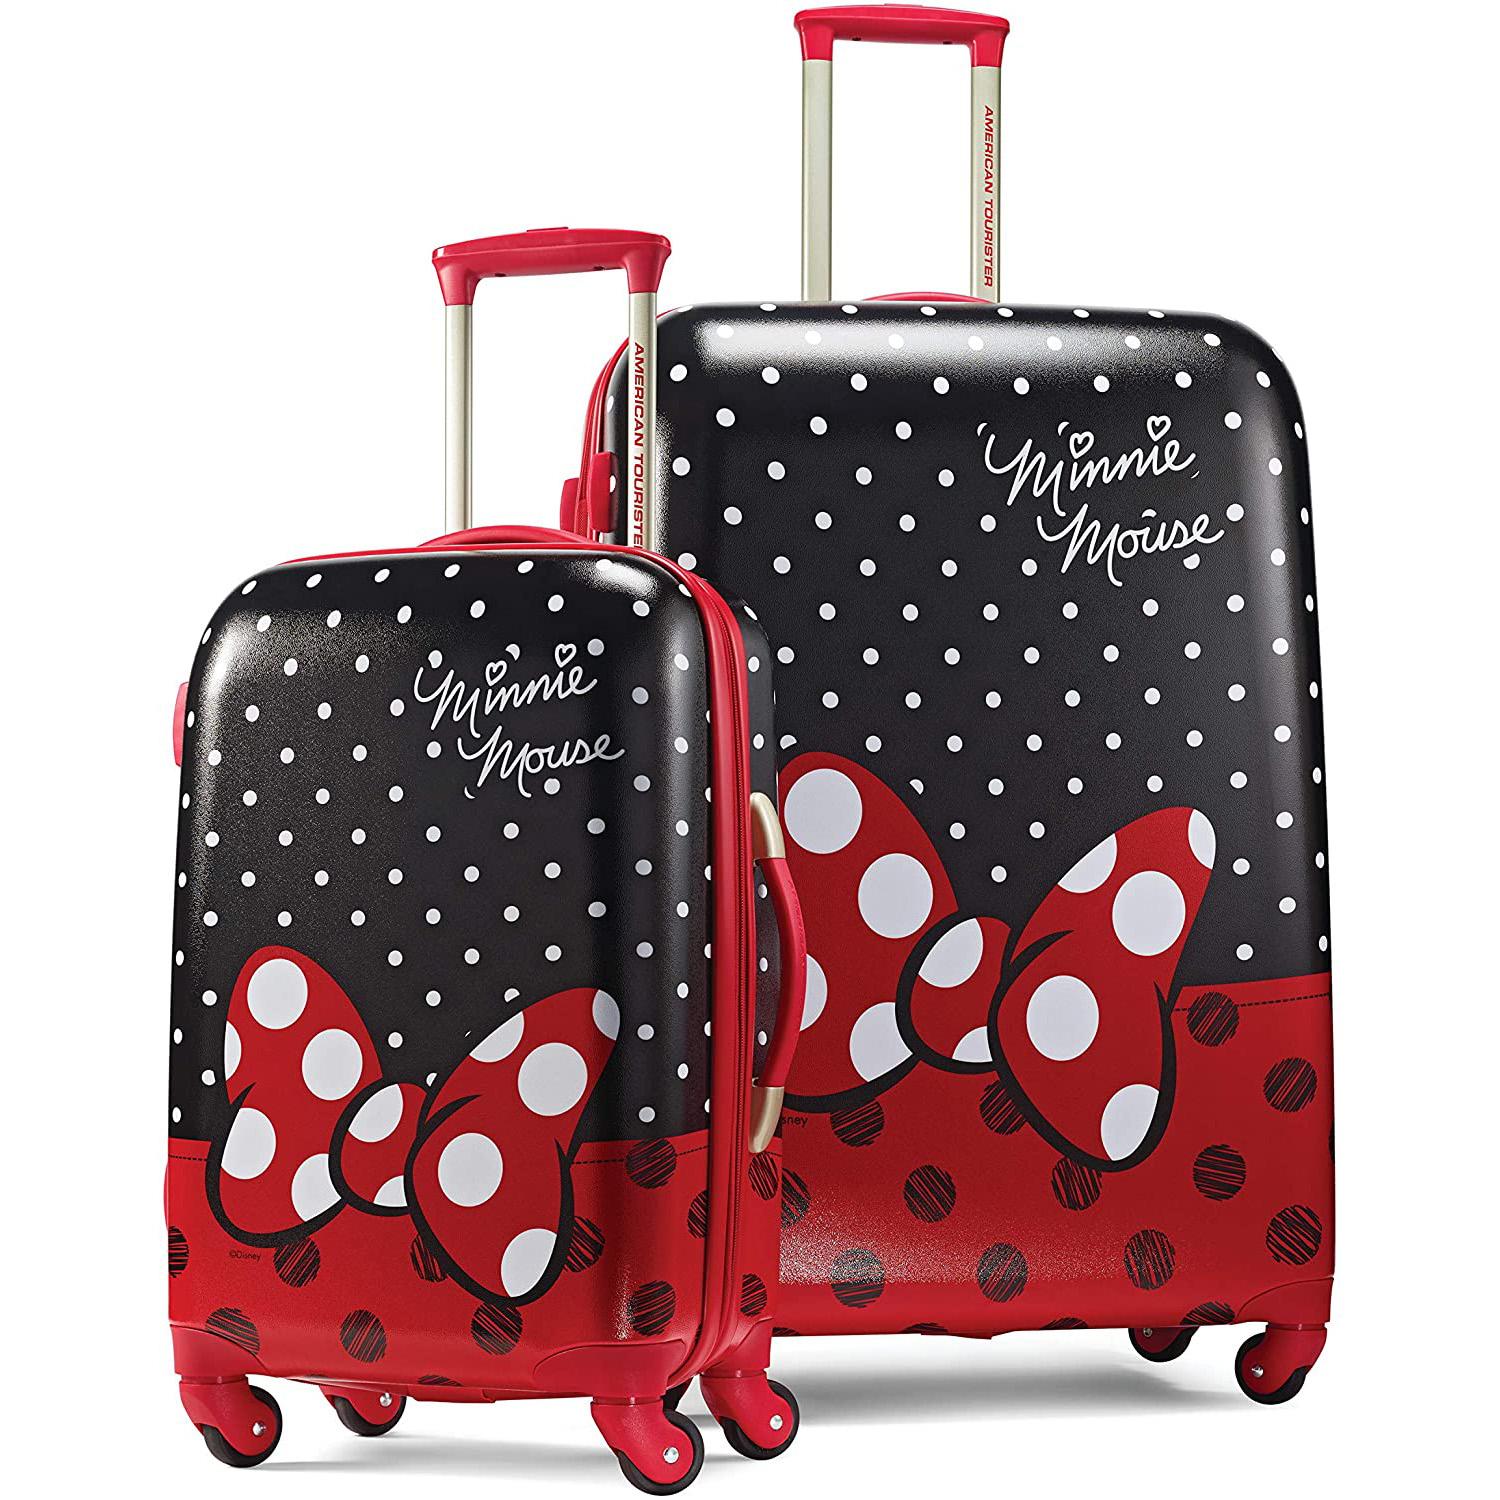 American Tourister Disney Hardside Luggage 2-Piece Set for $149.99 Shipped